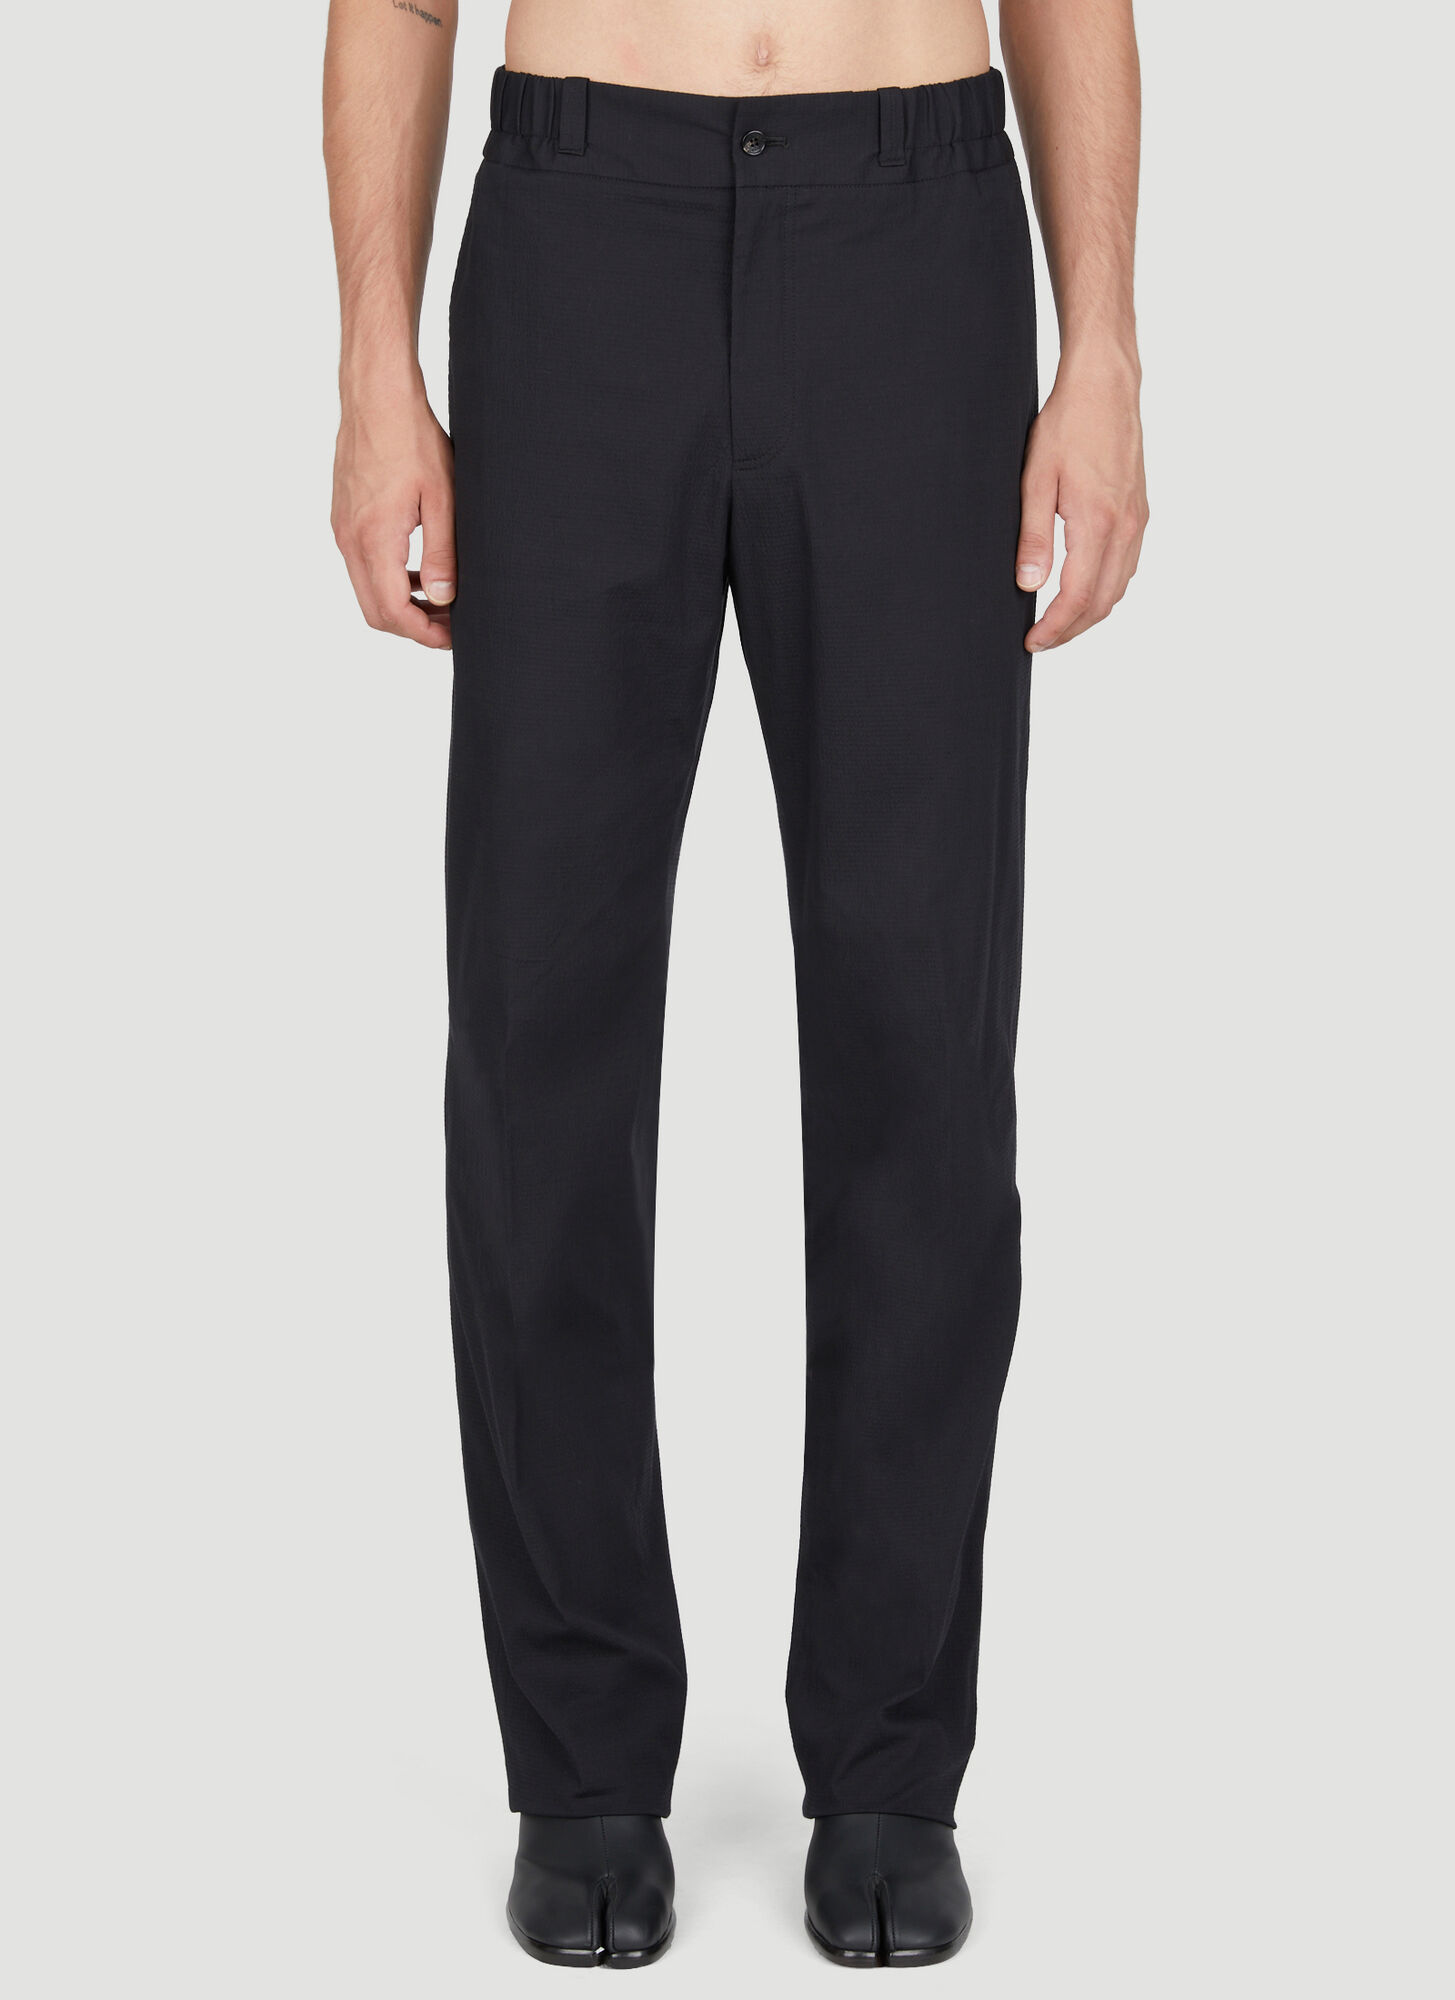 Lanvin Elasticated Waistband Suit Pants In Black